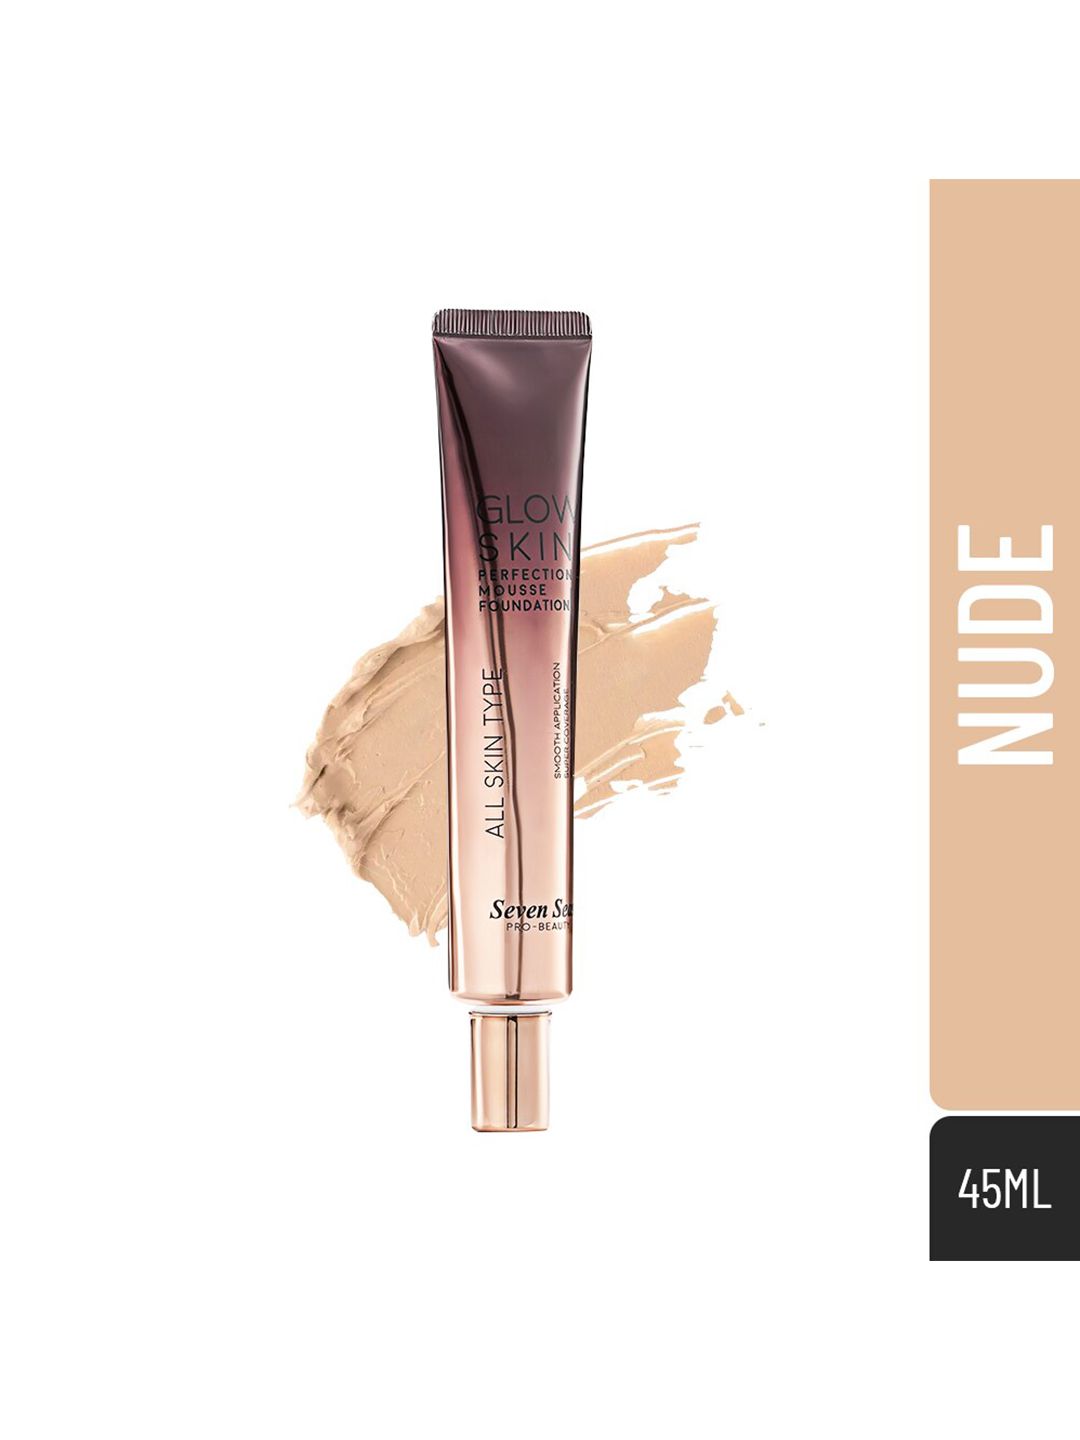 Seven Seas Glow Skin Perfection Mousse Foundation - Nude Price in India